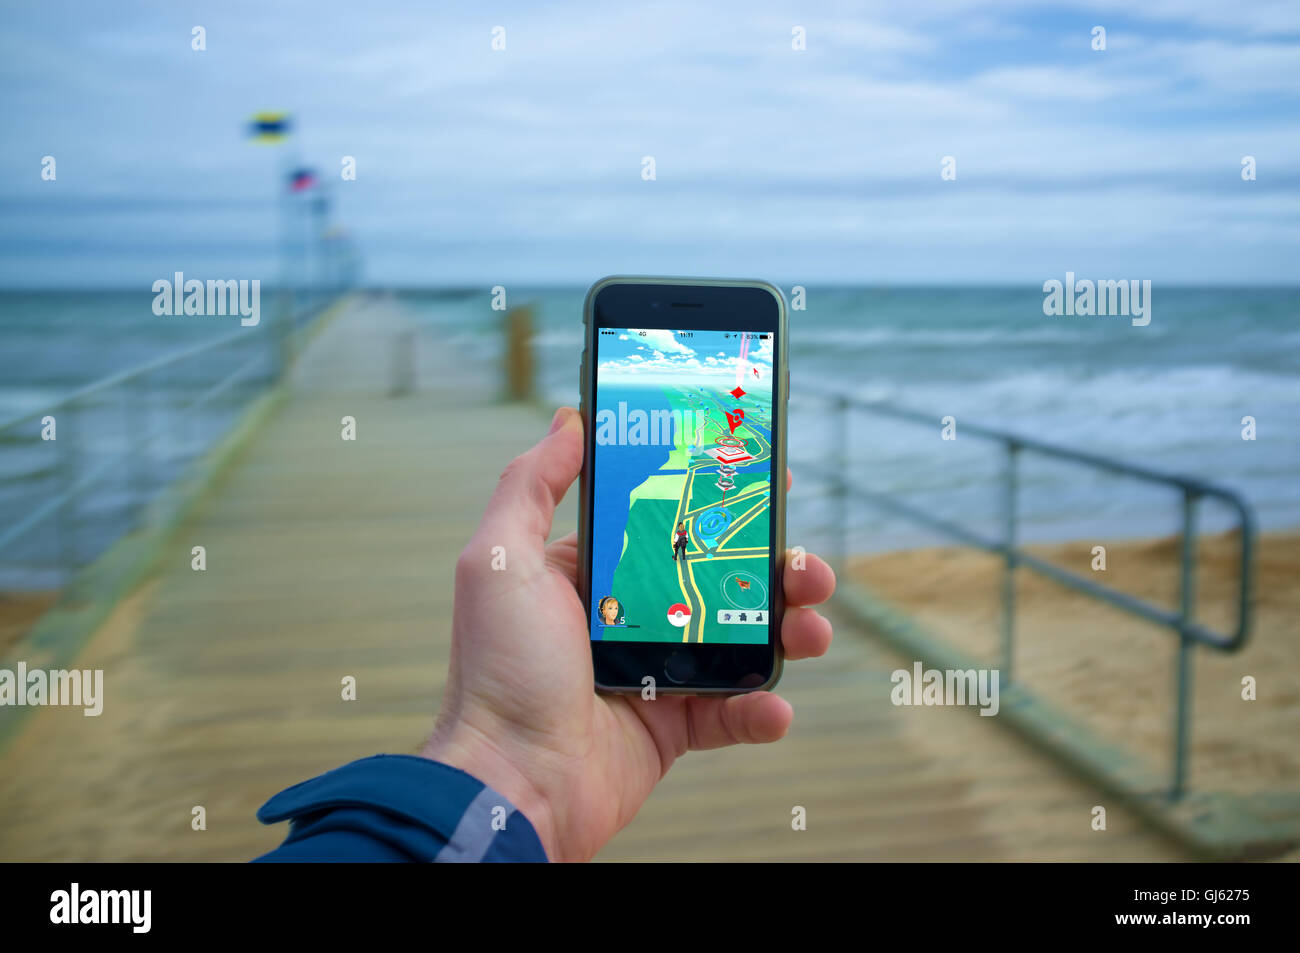 Melbourne, Australia - August 12, 2016: Male hand holding iPhone 6 with Pokemon Go game on a pier. Stock Photo